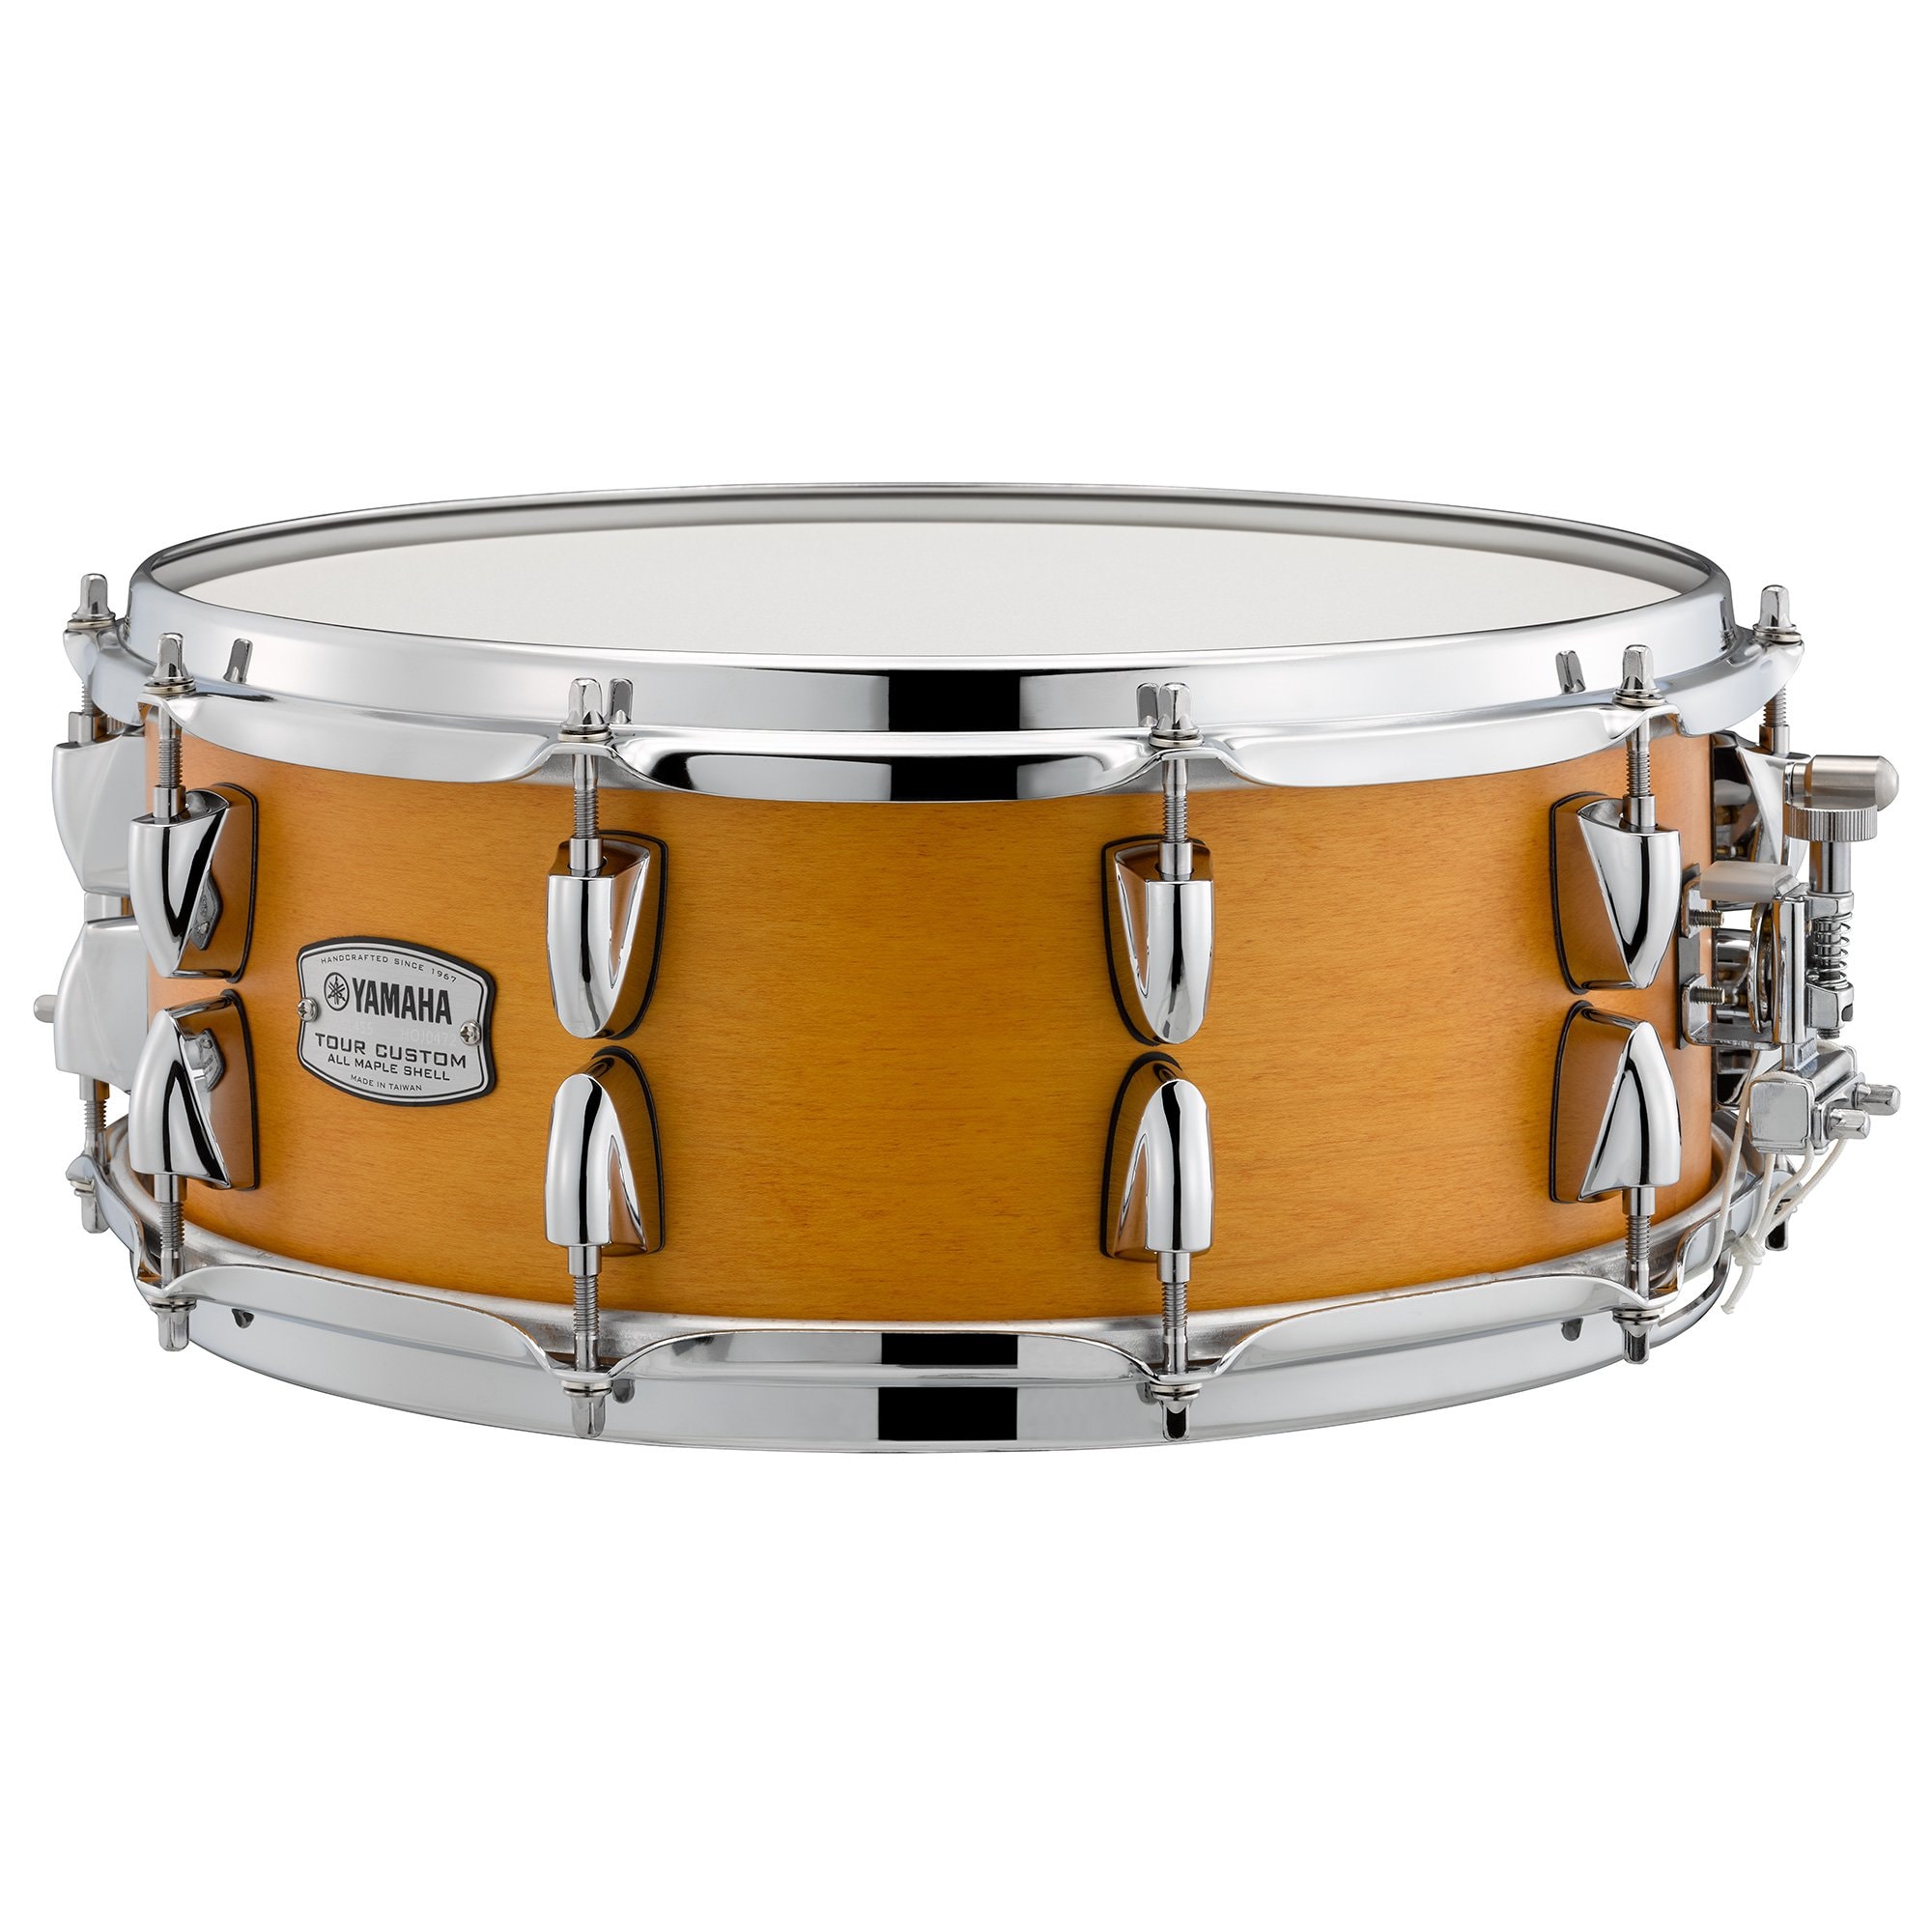 Tour Custom Snare Drums - Overview - Snare Drums - Acoustic Drums